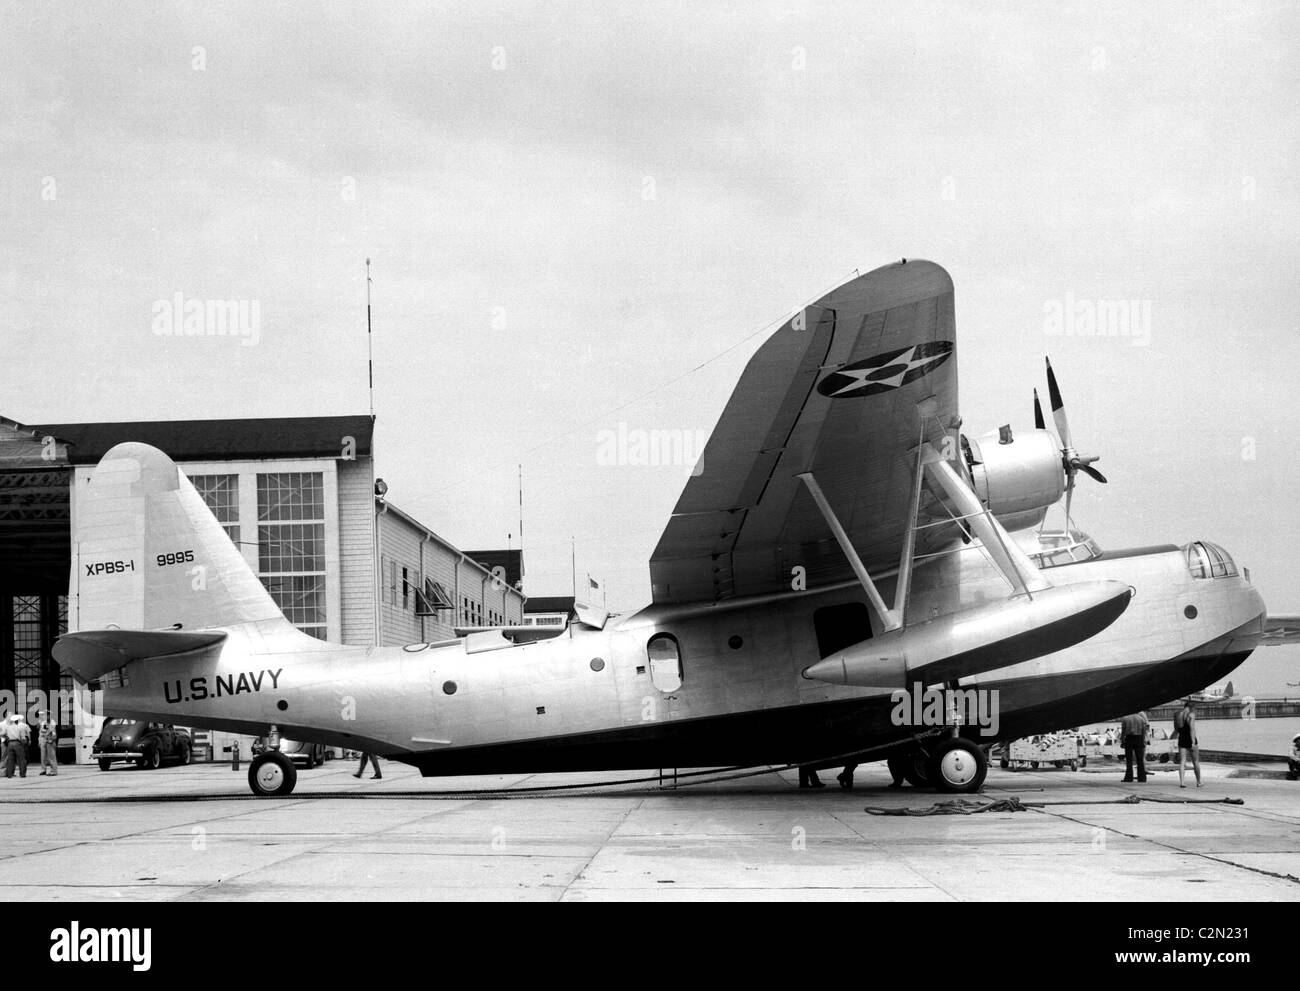 Sikorsky XPBS-1 patrol bomber, Sikorsky VS-44 was a large four-engined flying boat aircraft Stock Photo